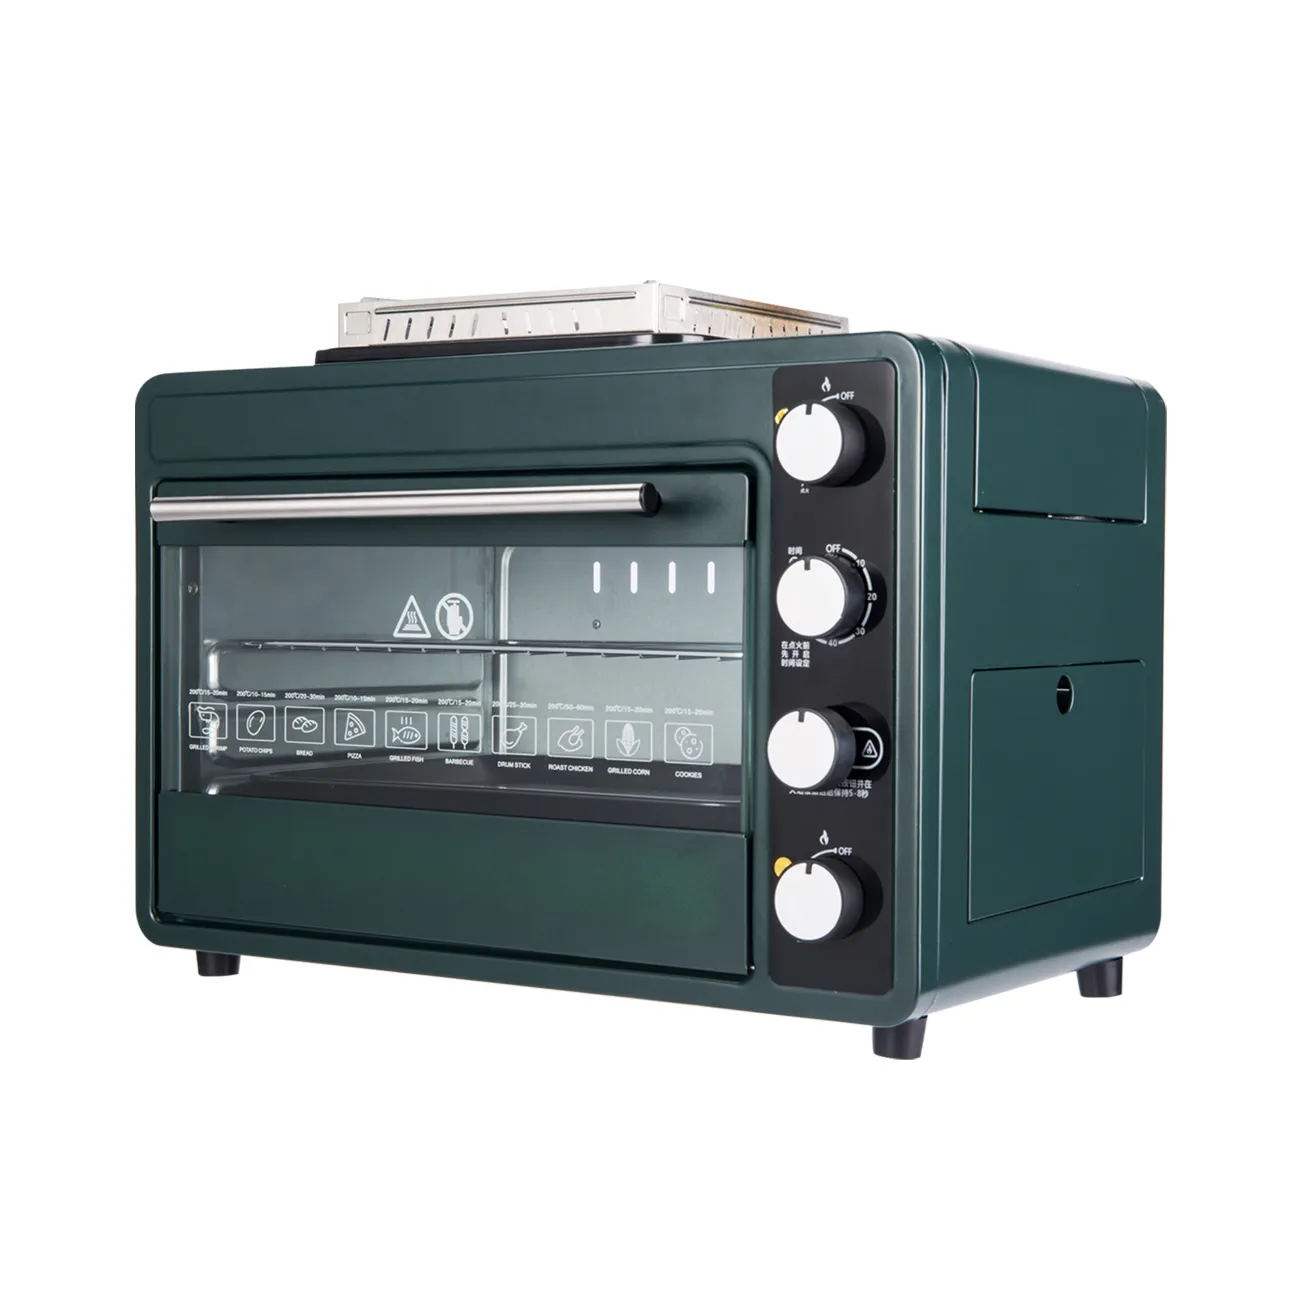 Outdoor Pizza Oven For Sale Pizza Steak Price portable gas oven with stove